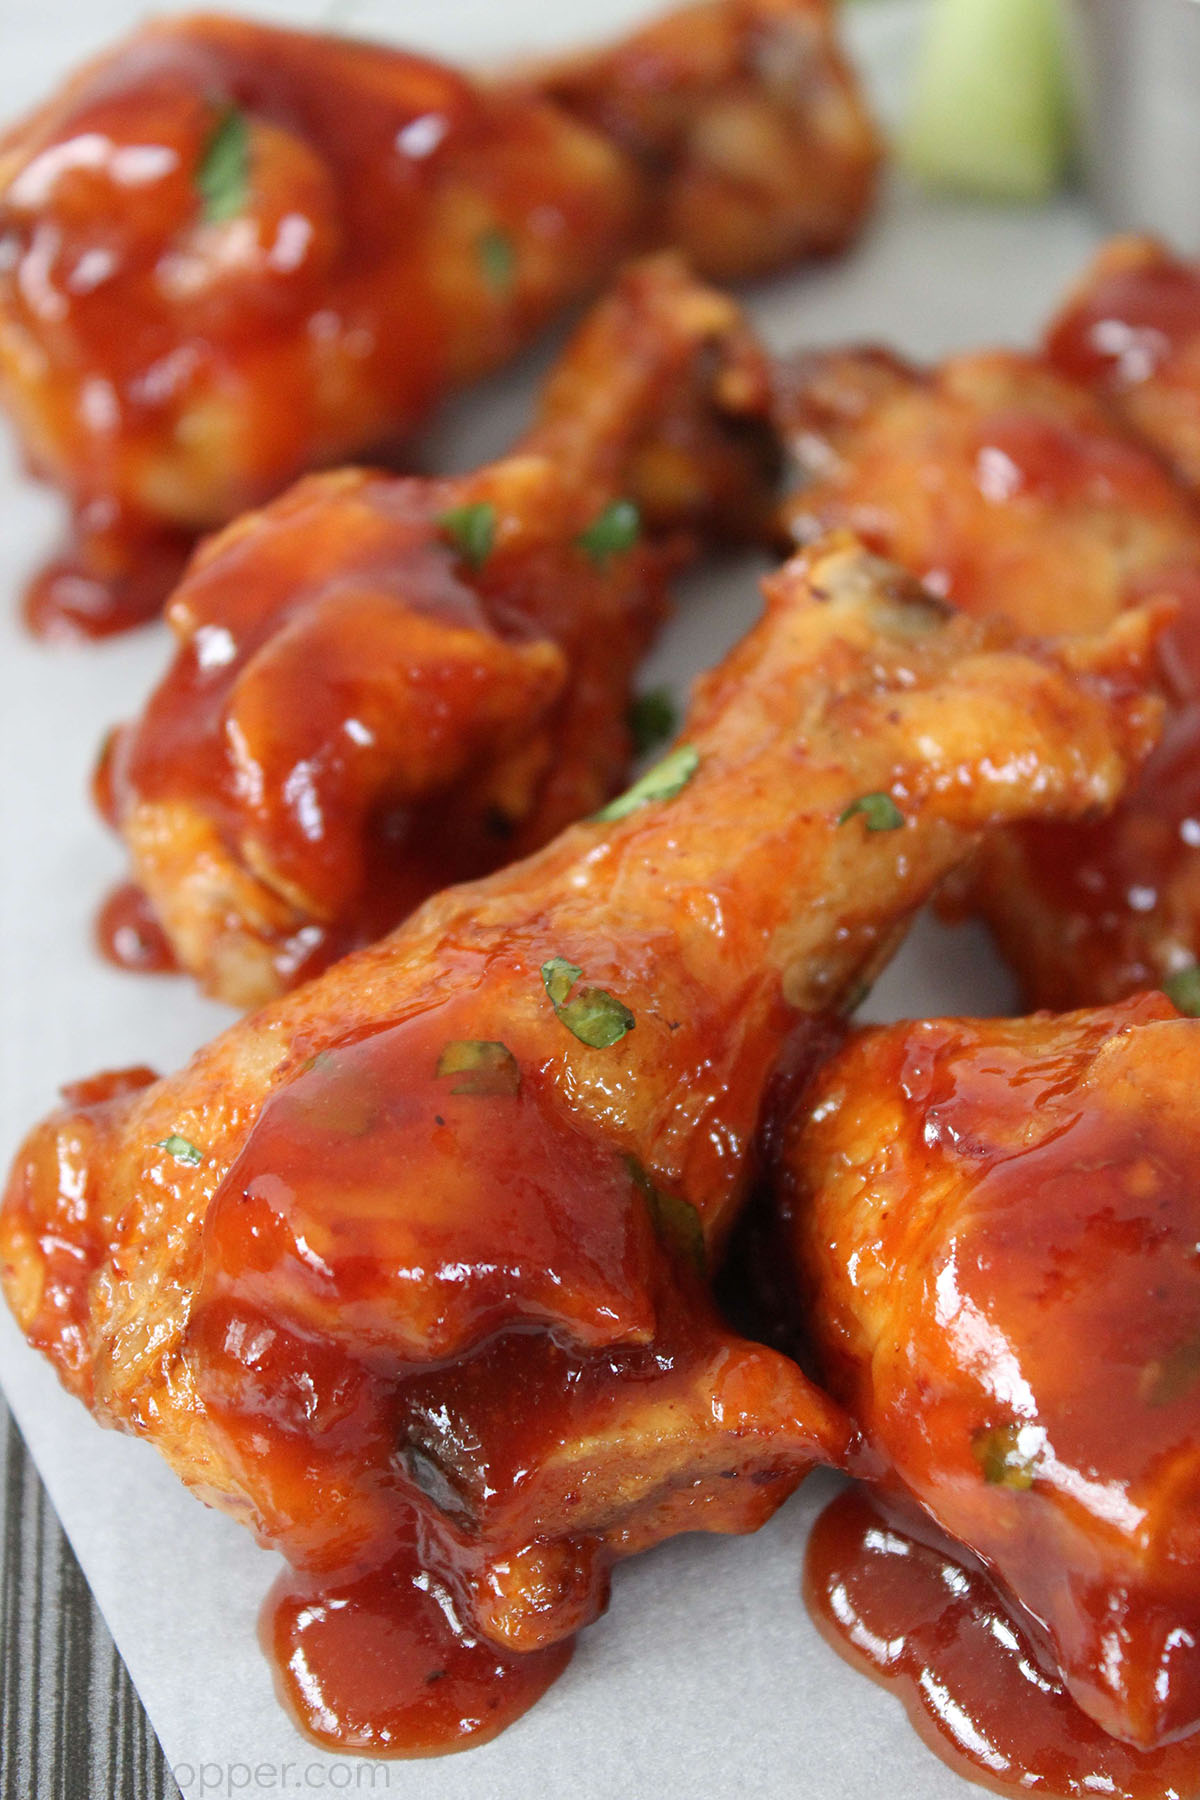 Boiled Chicken Wings that have been baked and sauced.